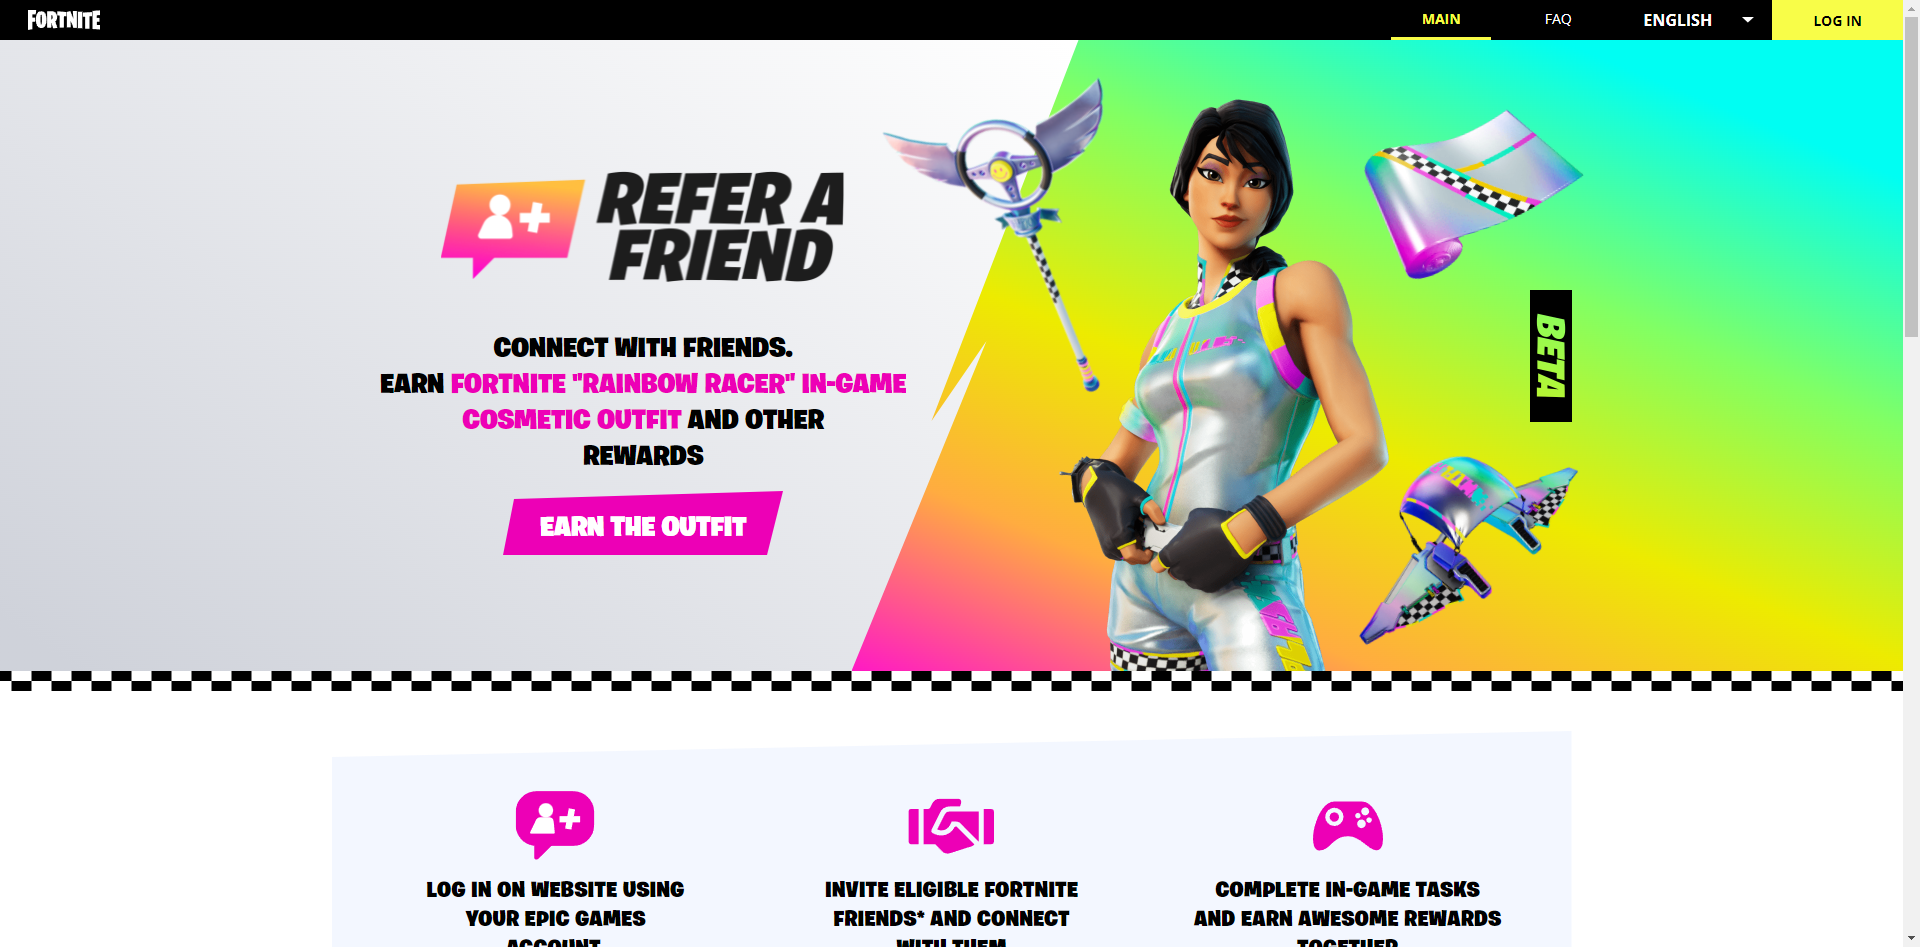 Fortnite Launches New Refer A Friend Event With Free Outfit To Be Unlocked Fortnite News